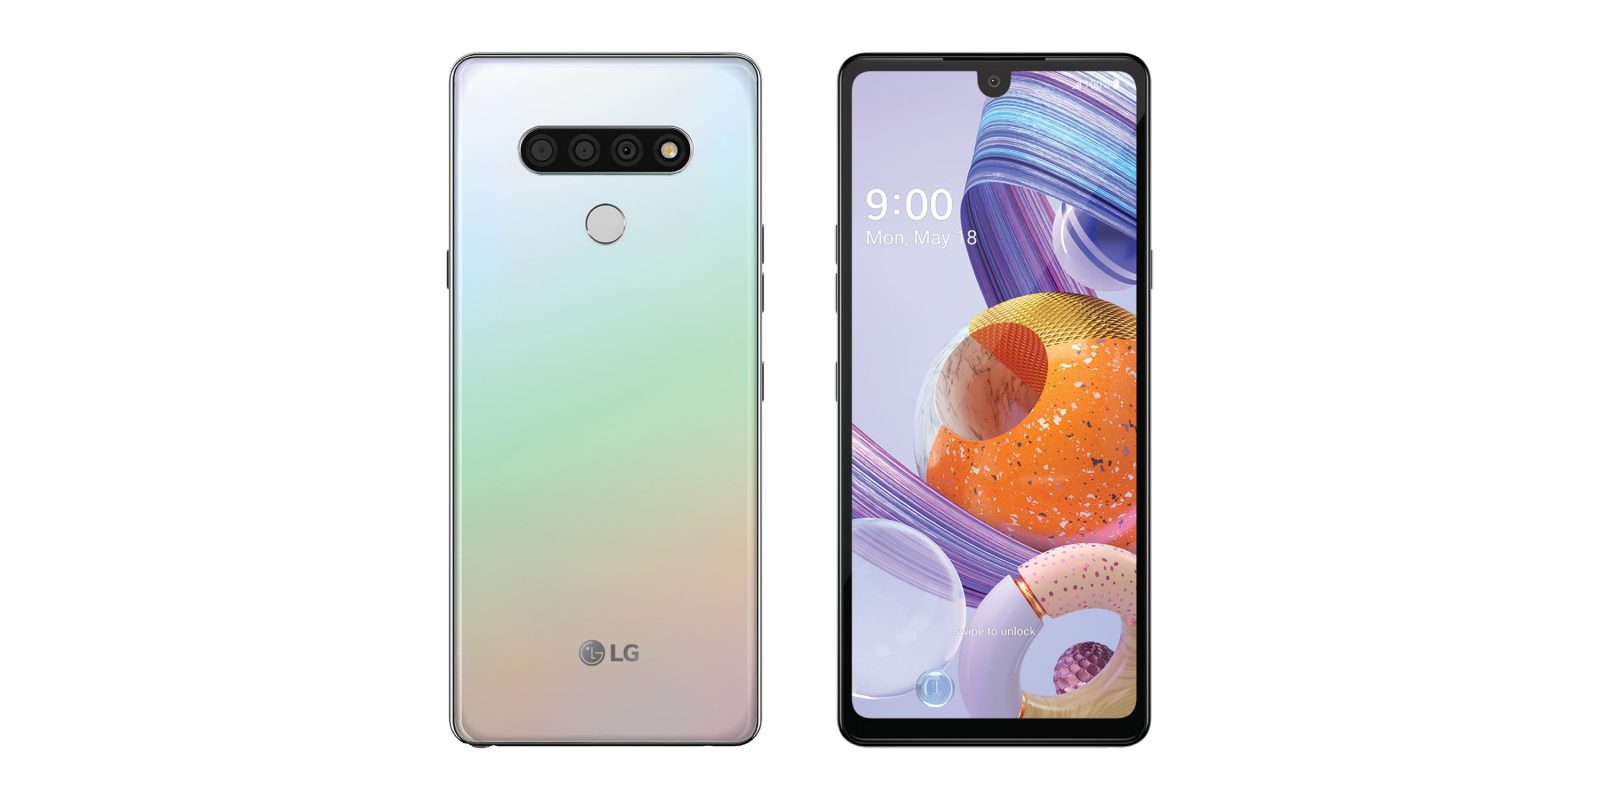 LG Stylo 6: Official price, specs, where to buy - 9to5Google